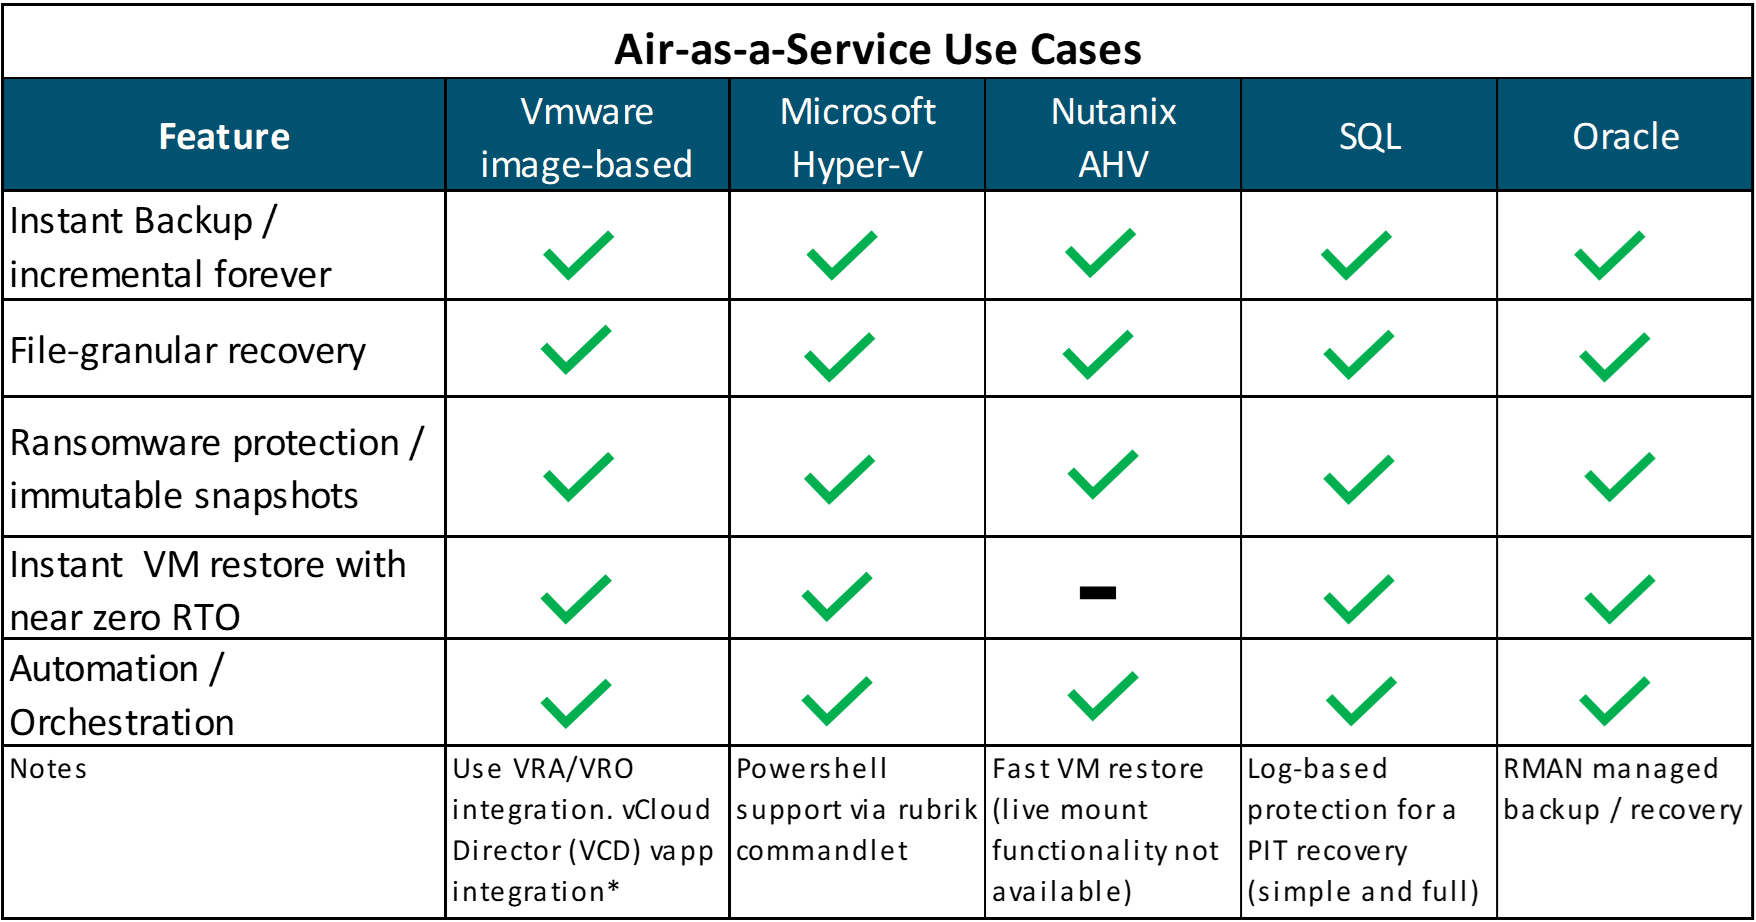 Air-as-a-Service Use Cases